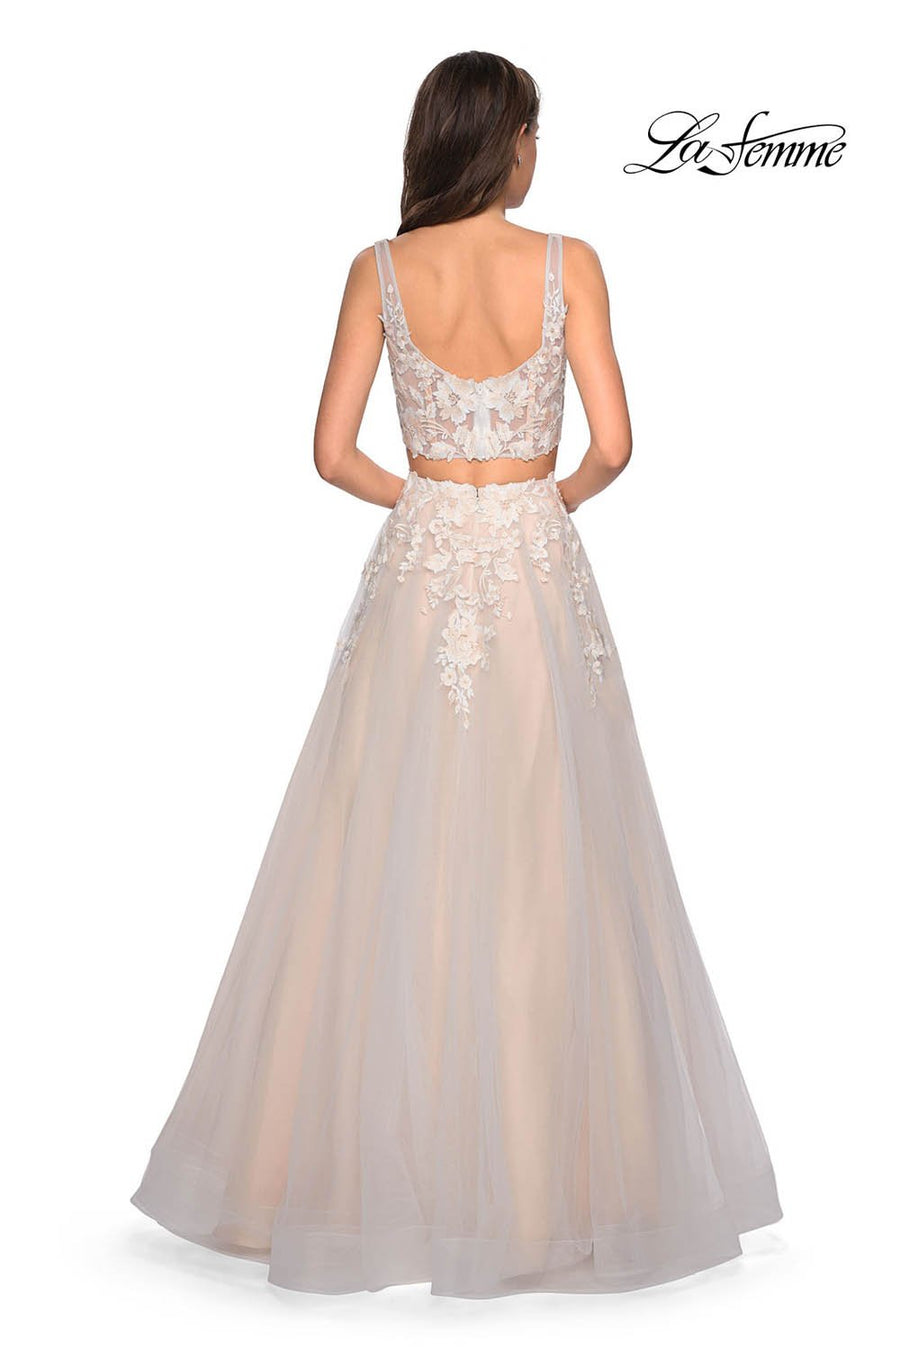 La Femme 27635 prom dress images.  La Femme 27635 is available in these colors: Ivory Nude.